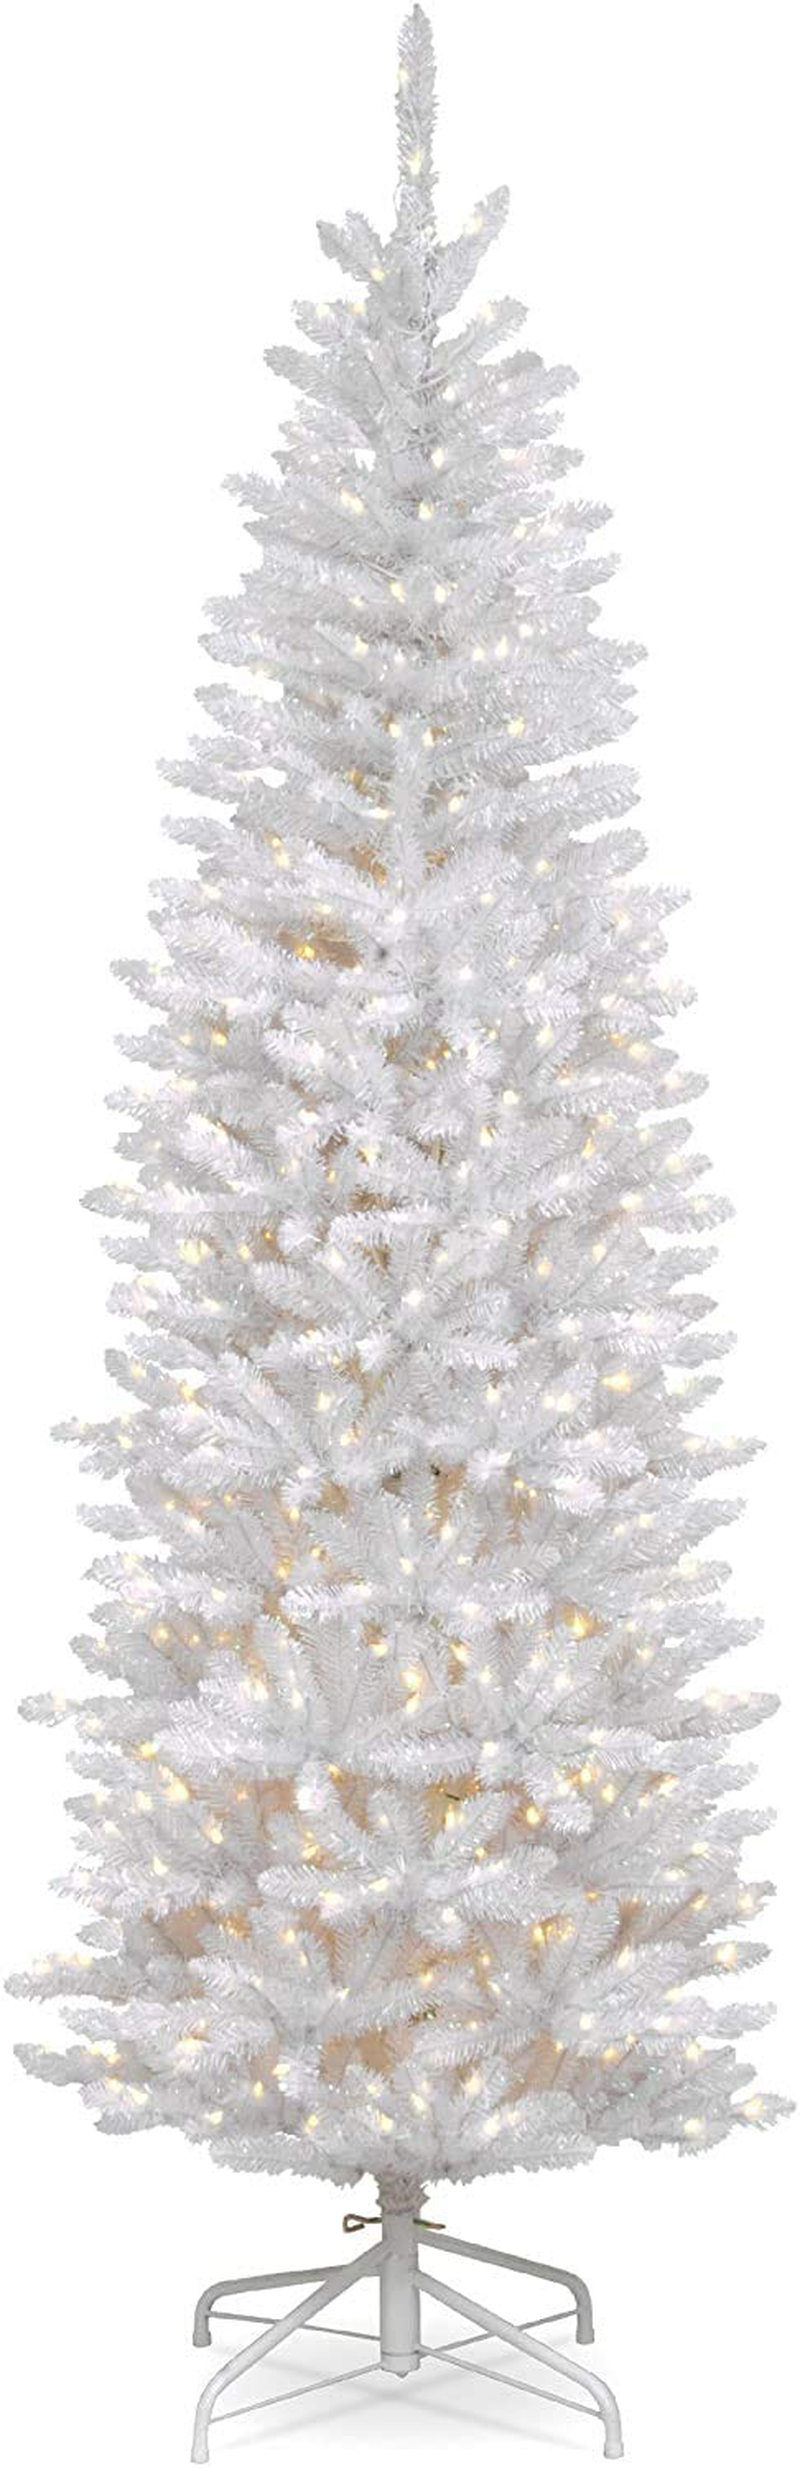 National Tree Company Pre-lit Artificial Christmas Tree Includes Strung White Lights and Stand Kingswood Fir Pencil-10, 10 ft Home & Garden > Decor > Seasonal & Holiday Decorations > Christmas Tree Stands National Tree Company Tree 7 ft 